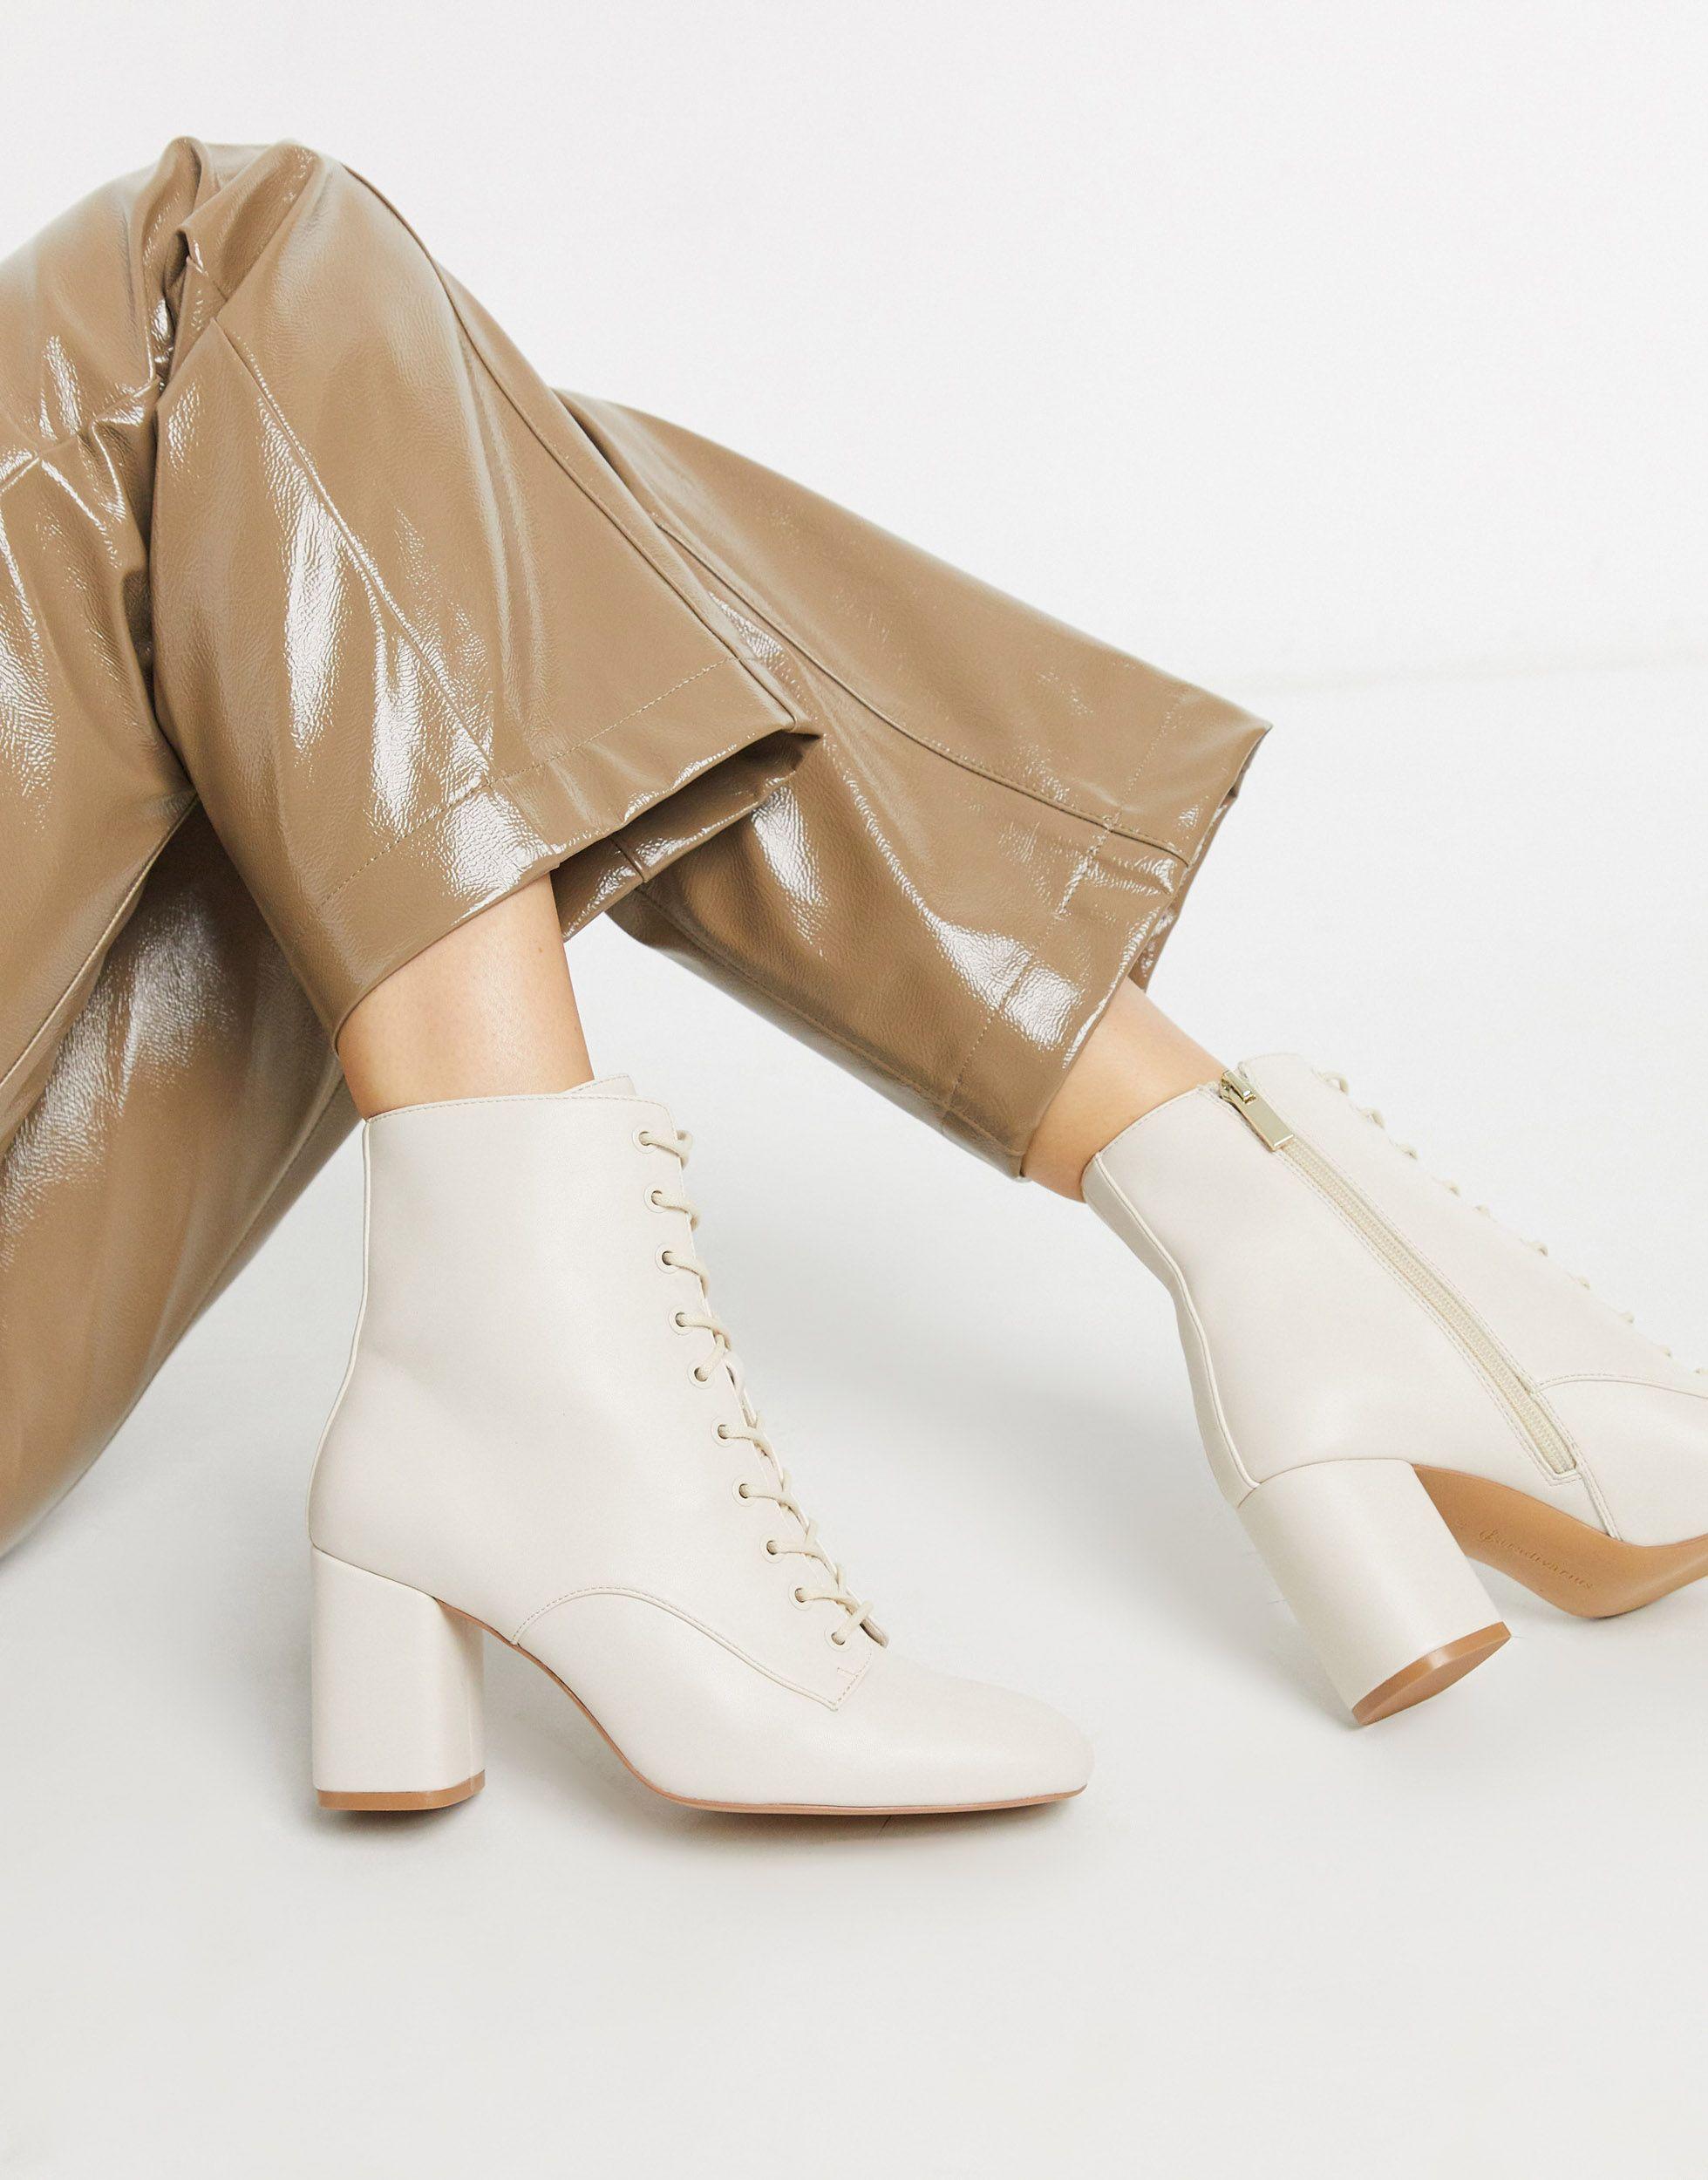 Back, back, back (part tissue together Stradivarius Lace Up Ankle Boots in White | Lyst